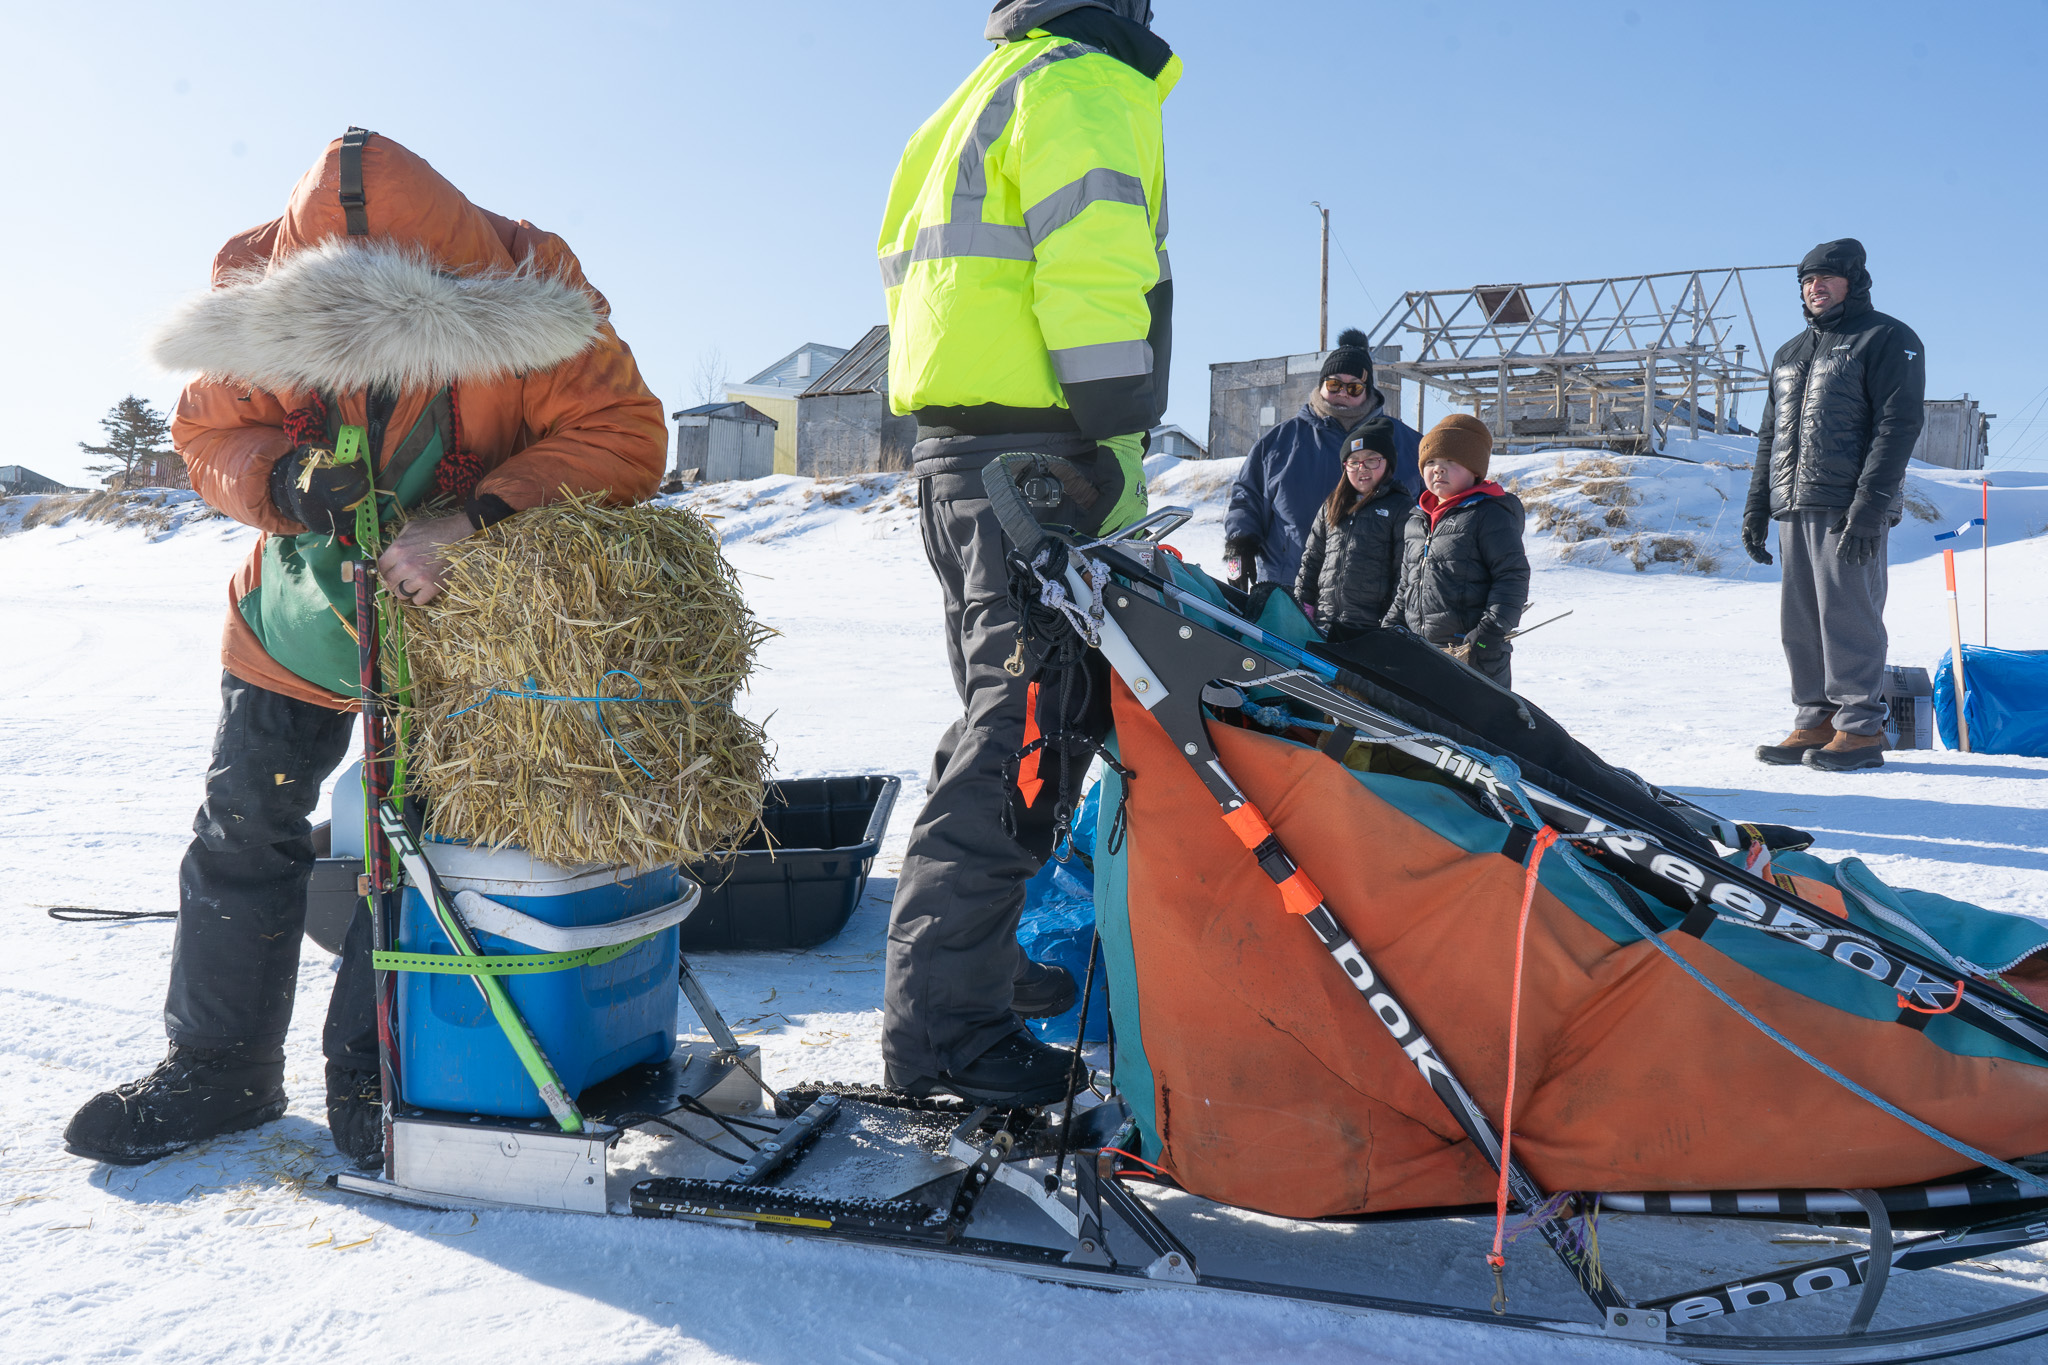 People watch as a musher ties straw to his sled